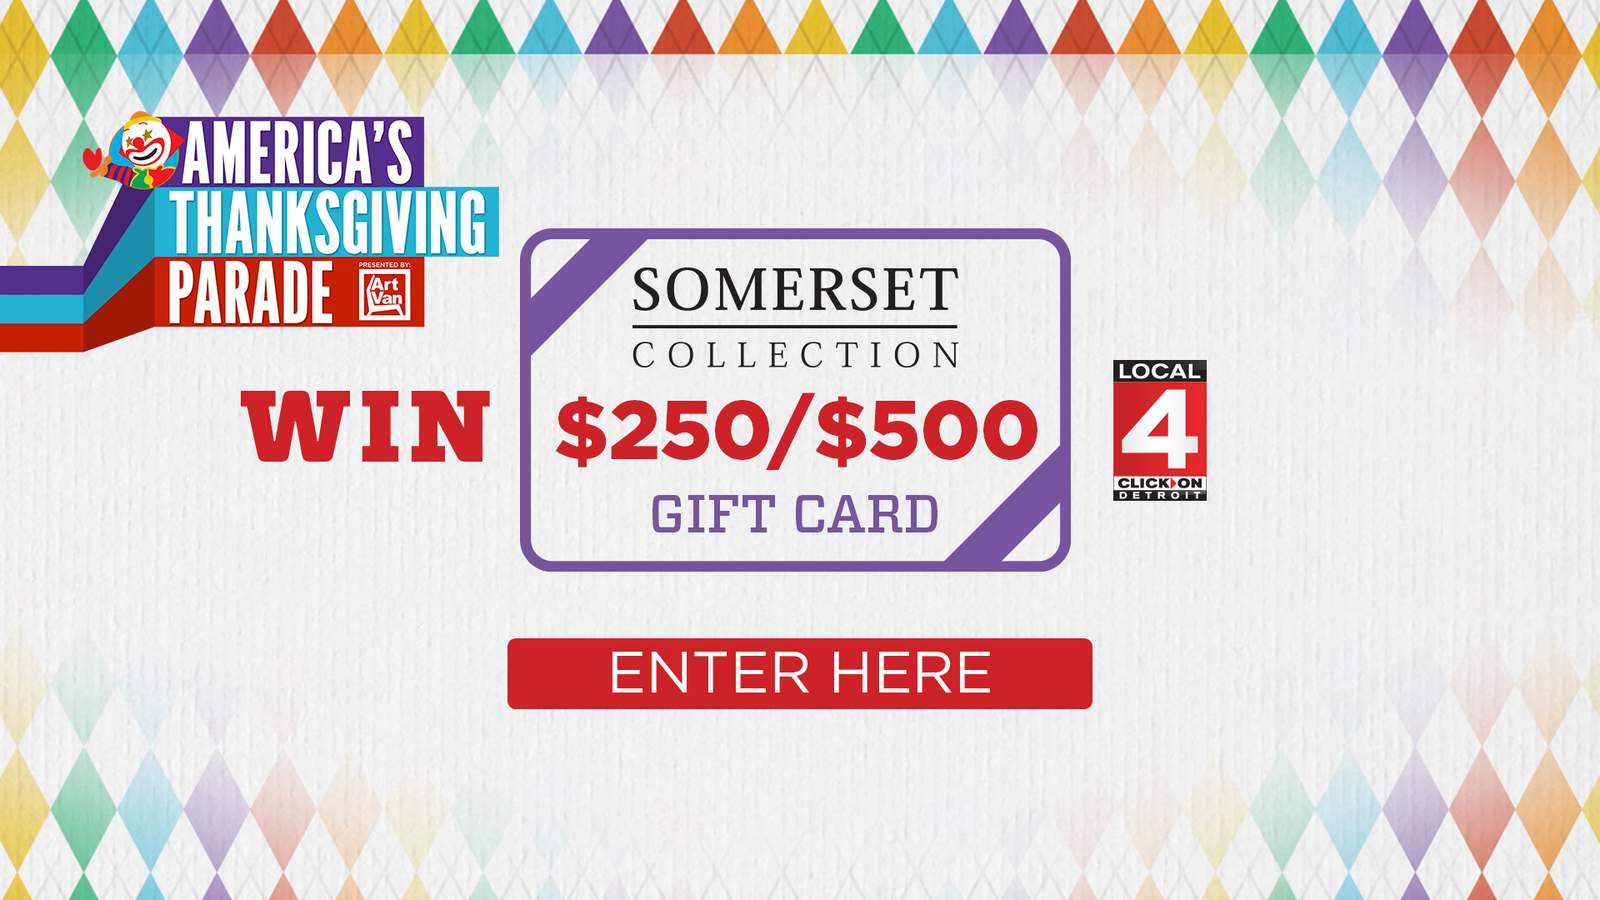 Somerset Collection Gift Card Contest Rules